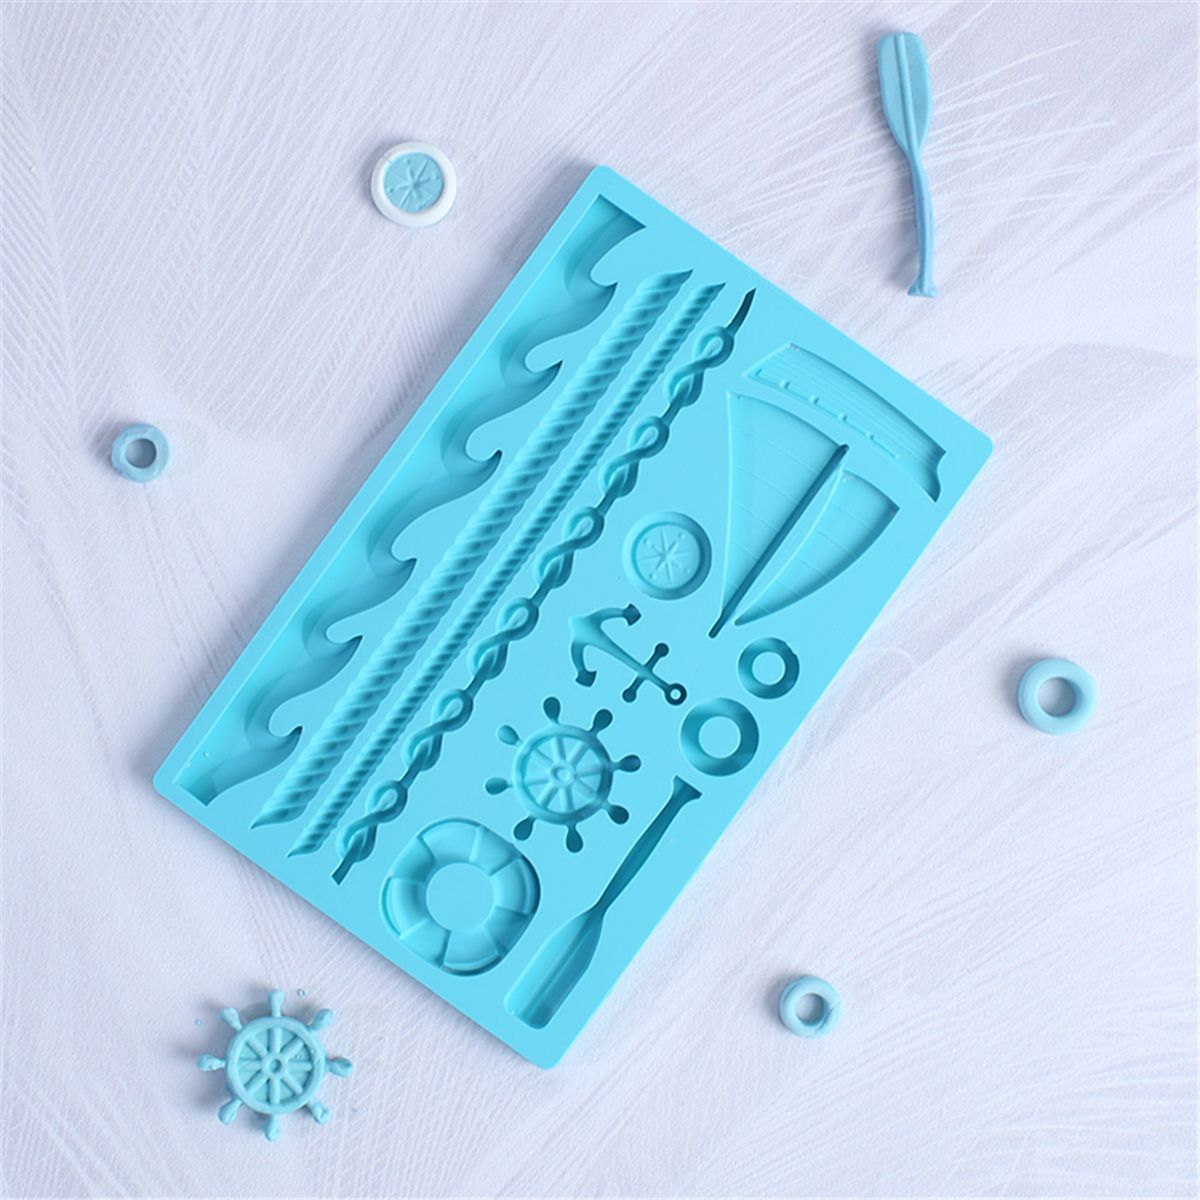 Anyana-Ocean-Theme-Oars-Helmsman-Silicone-Sailboat-Mold-Cake-Mould-Decorating-Tools-1575952